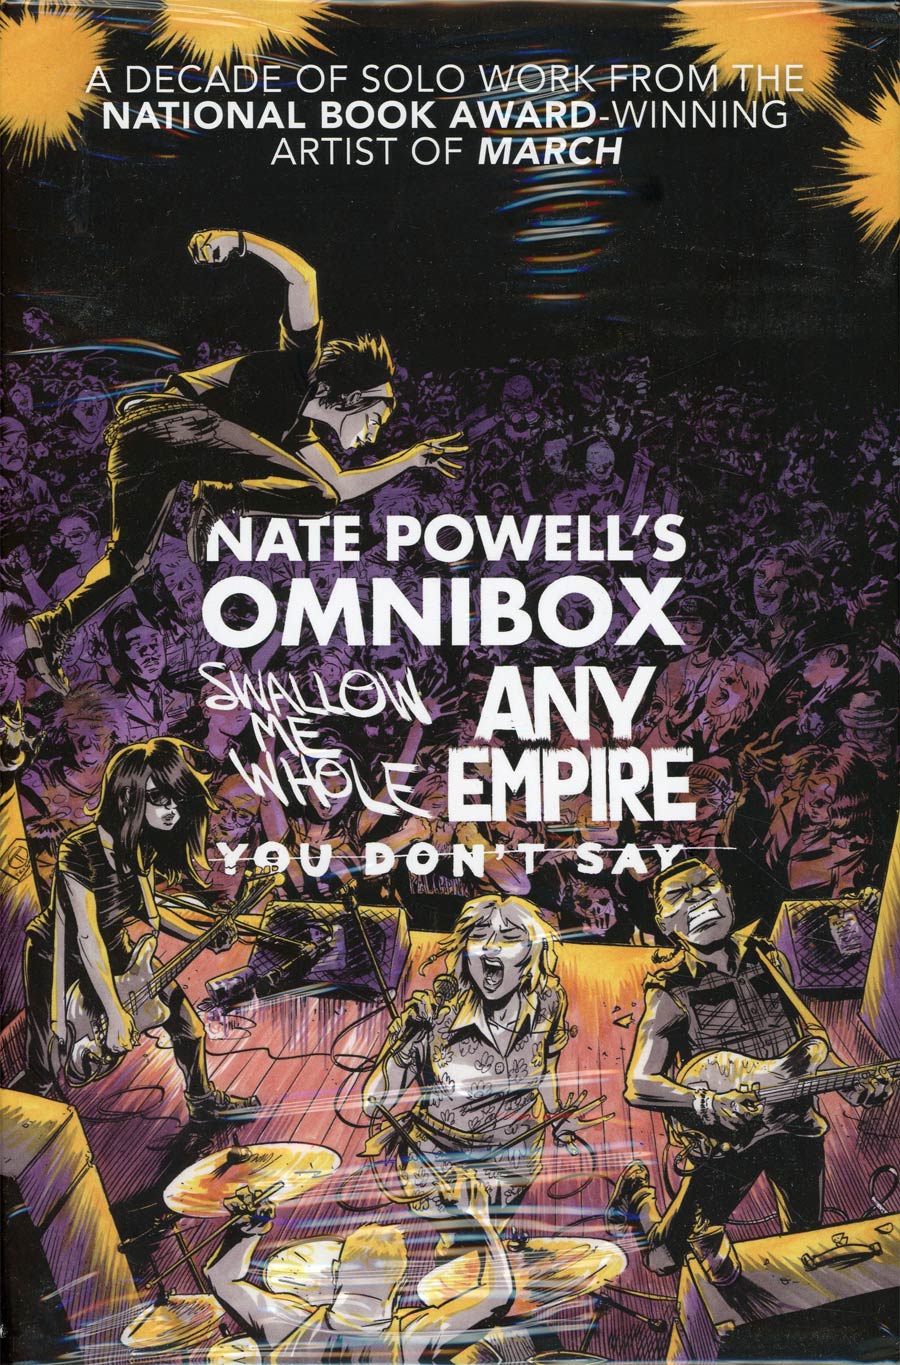 Nate Powells Omnibox Featuring Swallow Me Whole Any Empire And You Dont Say Slipcase